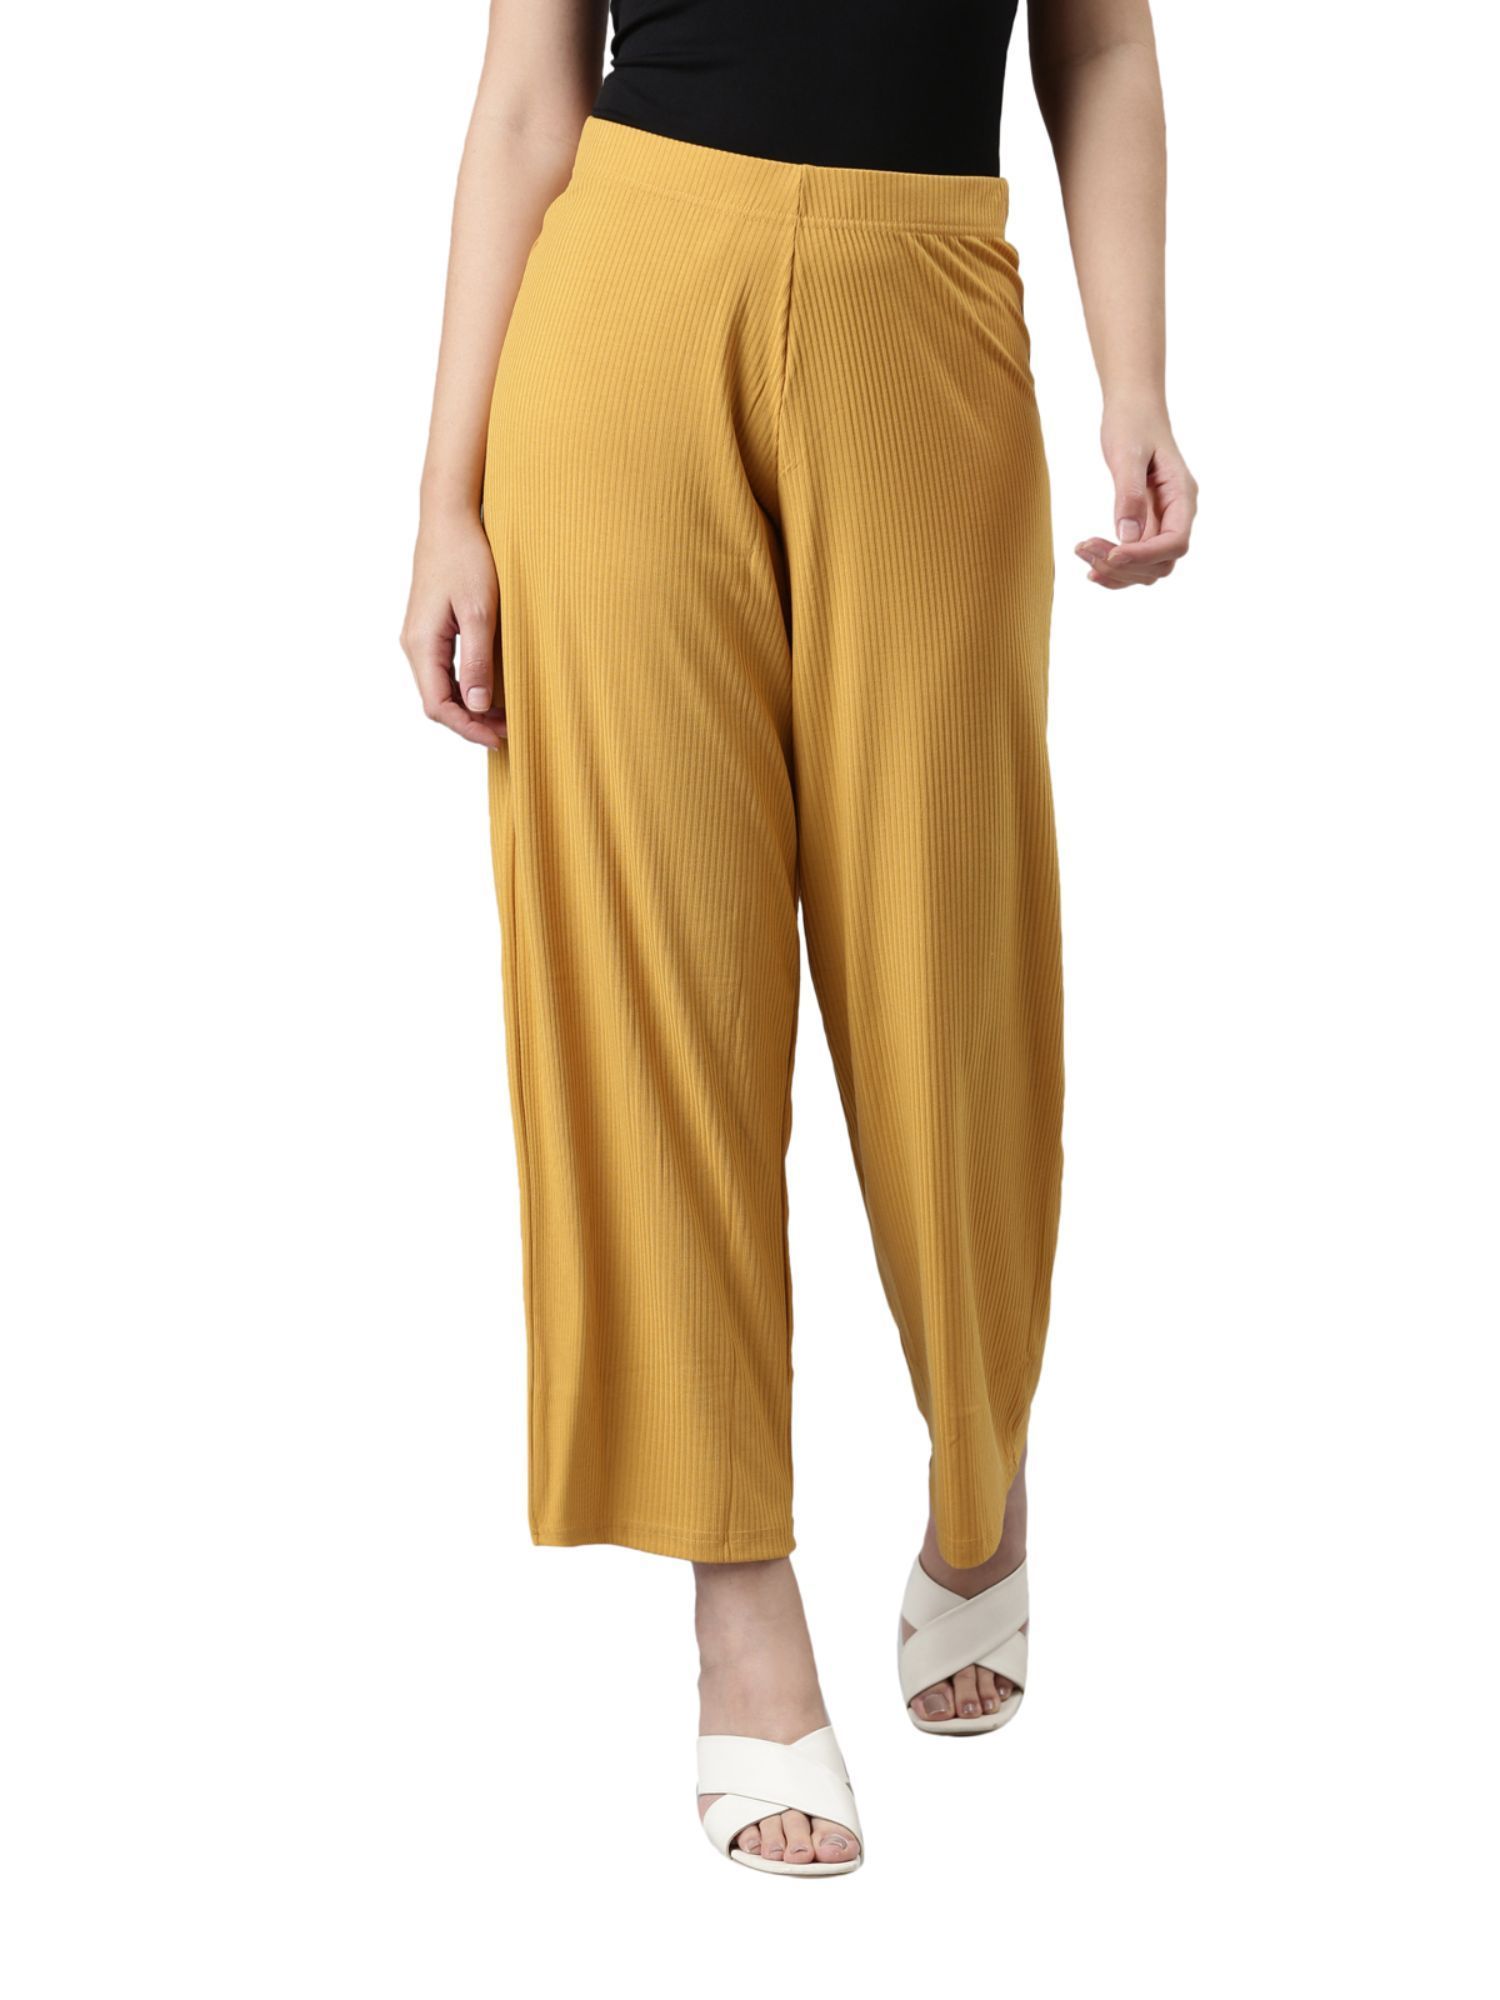 Buy Yellow Black Palazzo Pant Rayon for Best Price Reviews Free Shipping